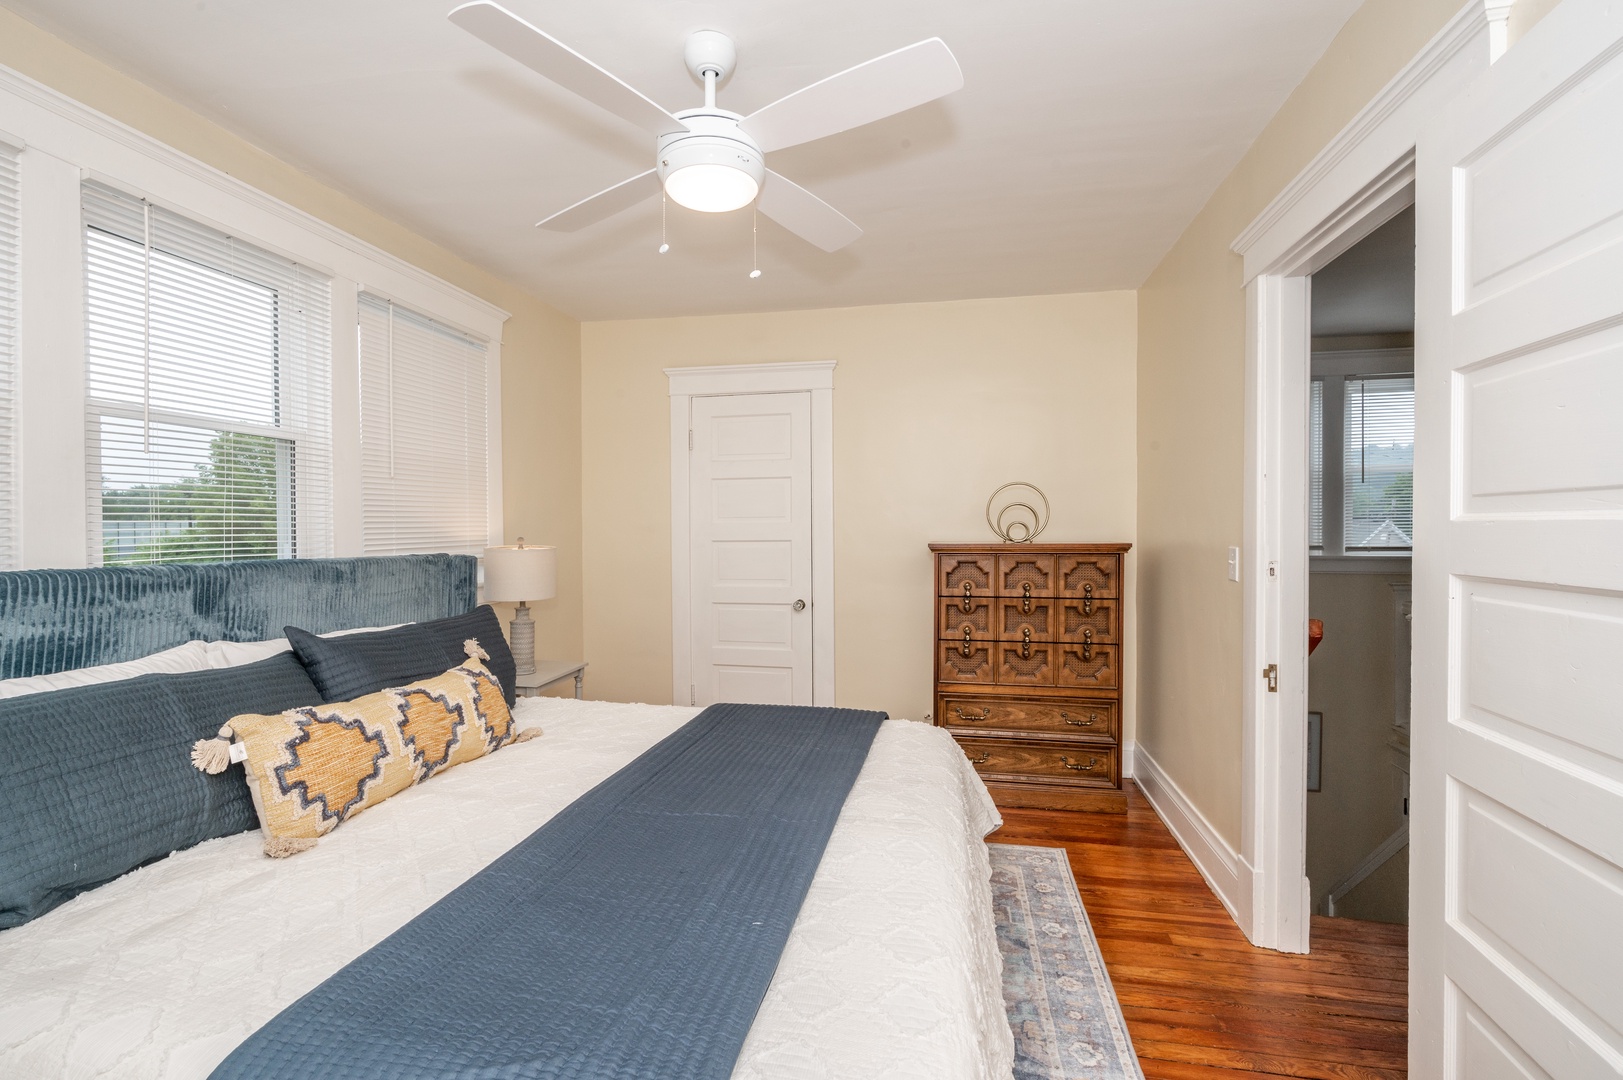 The 1st of 3 bedrooms offers a king bed & ceiling fan